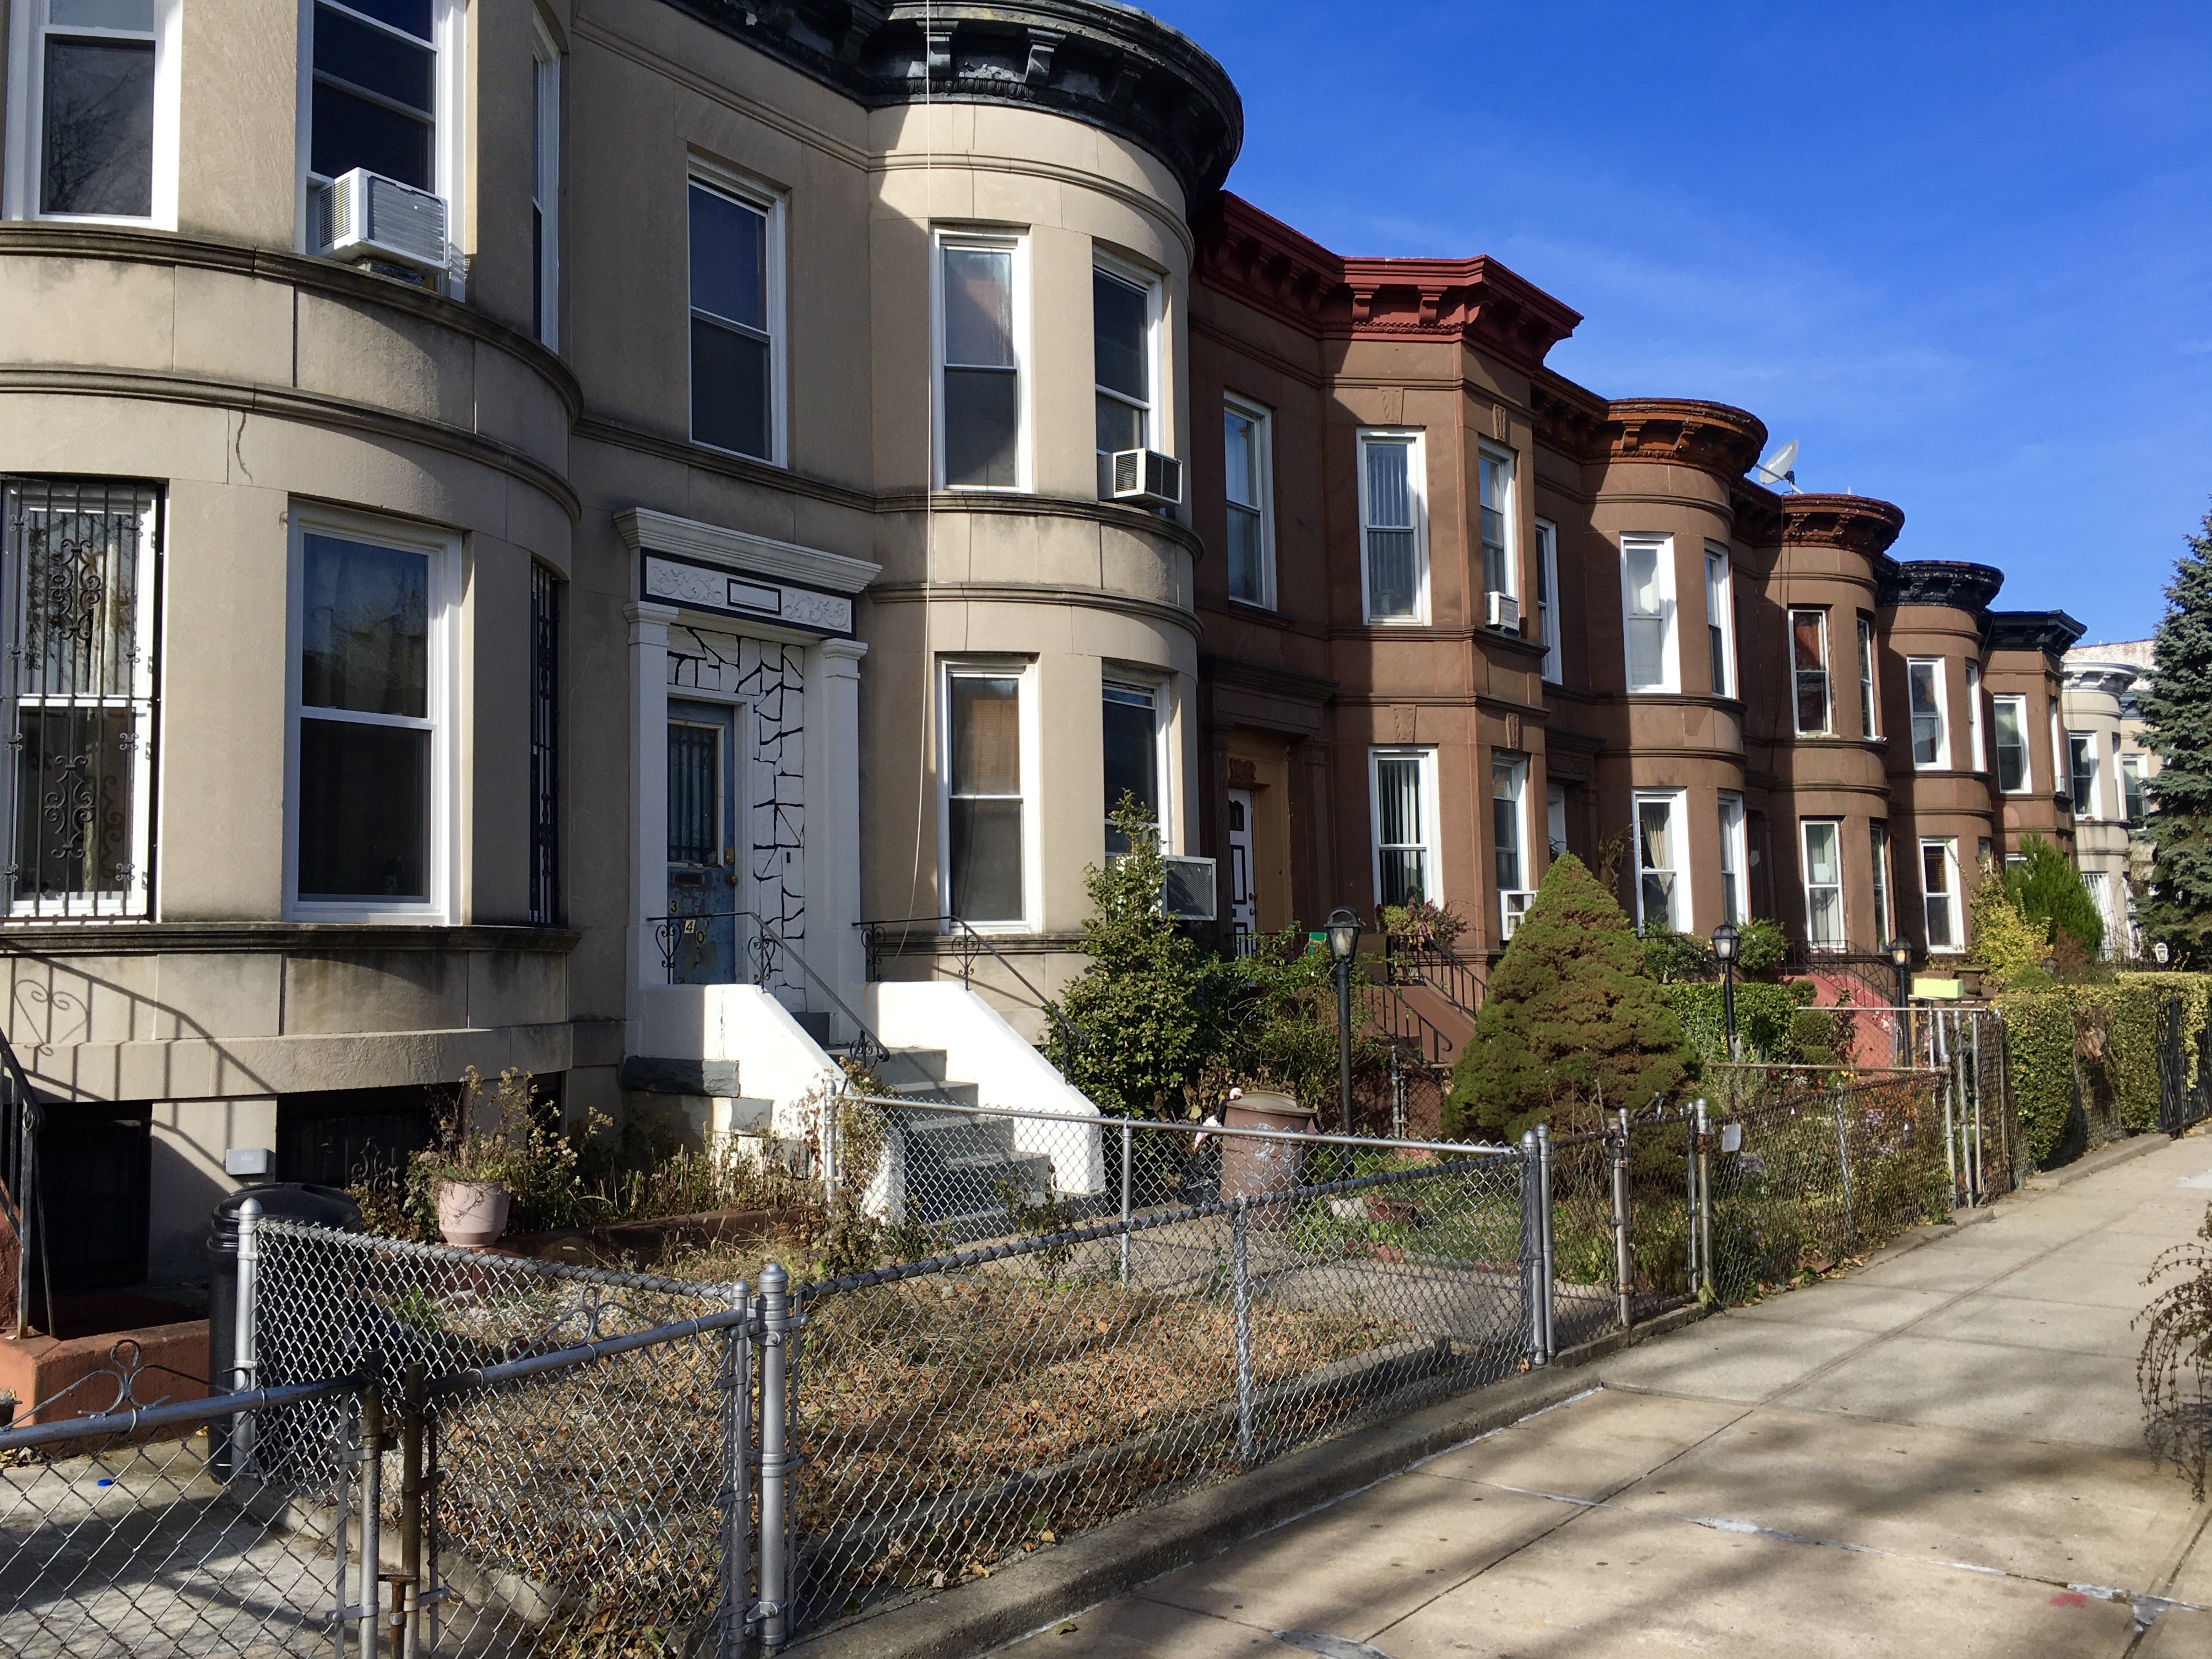 The East 25th Street block that’s a proposed historic-district candidate is a mix of limestone and brownstone homes. Photo: Lore Croghan/Brooklyn Eagle